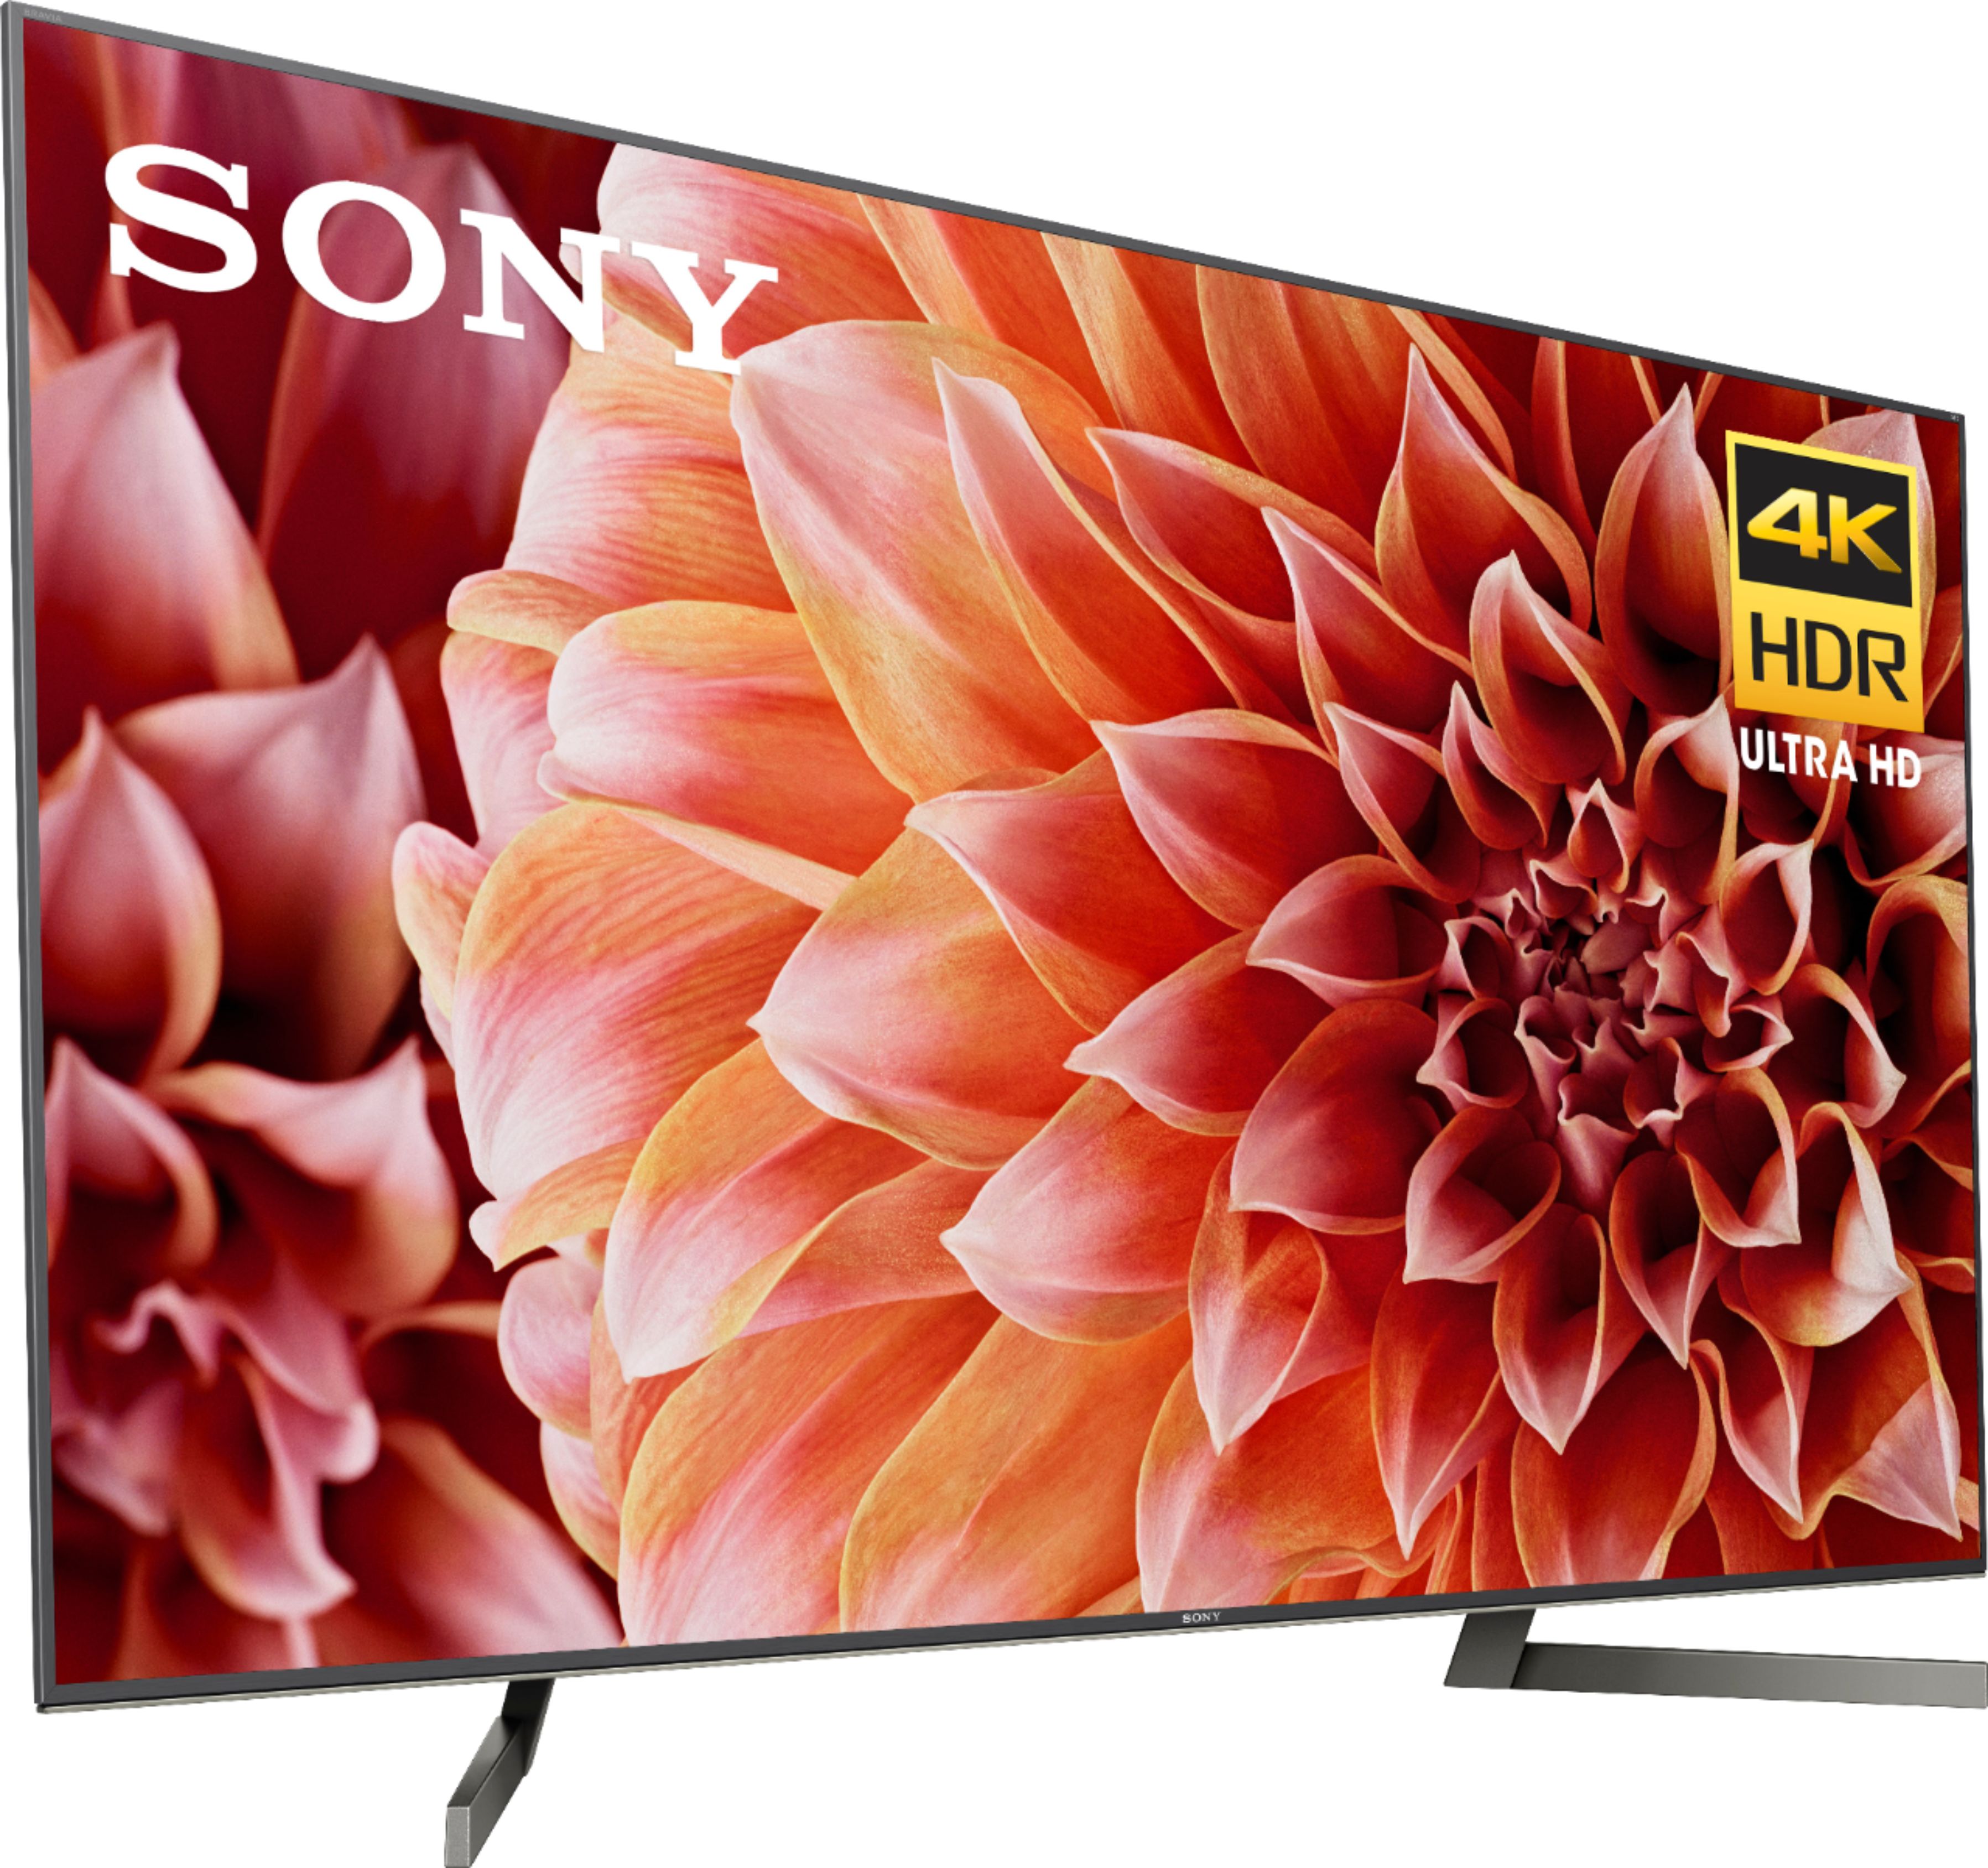 Best Buy: Sony 65" X900F Series LED 4K UHD Smart Android